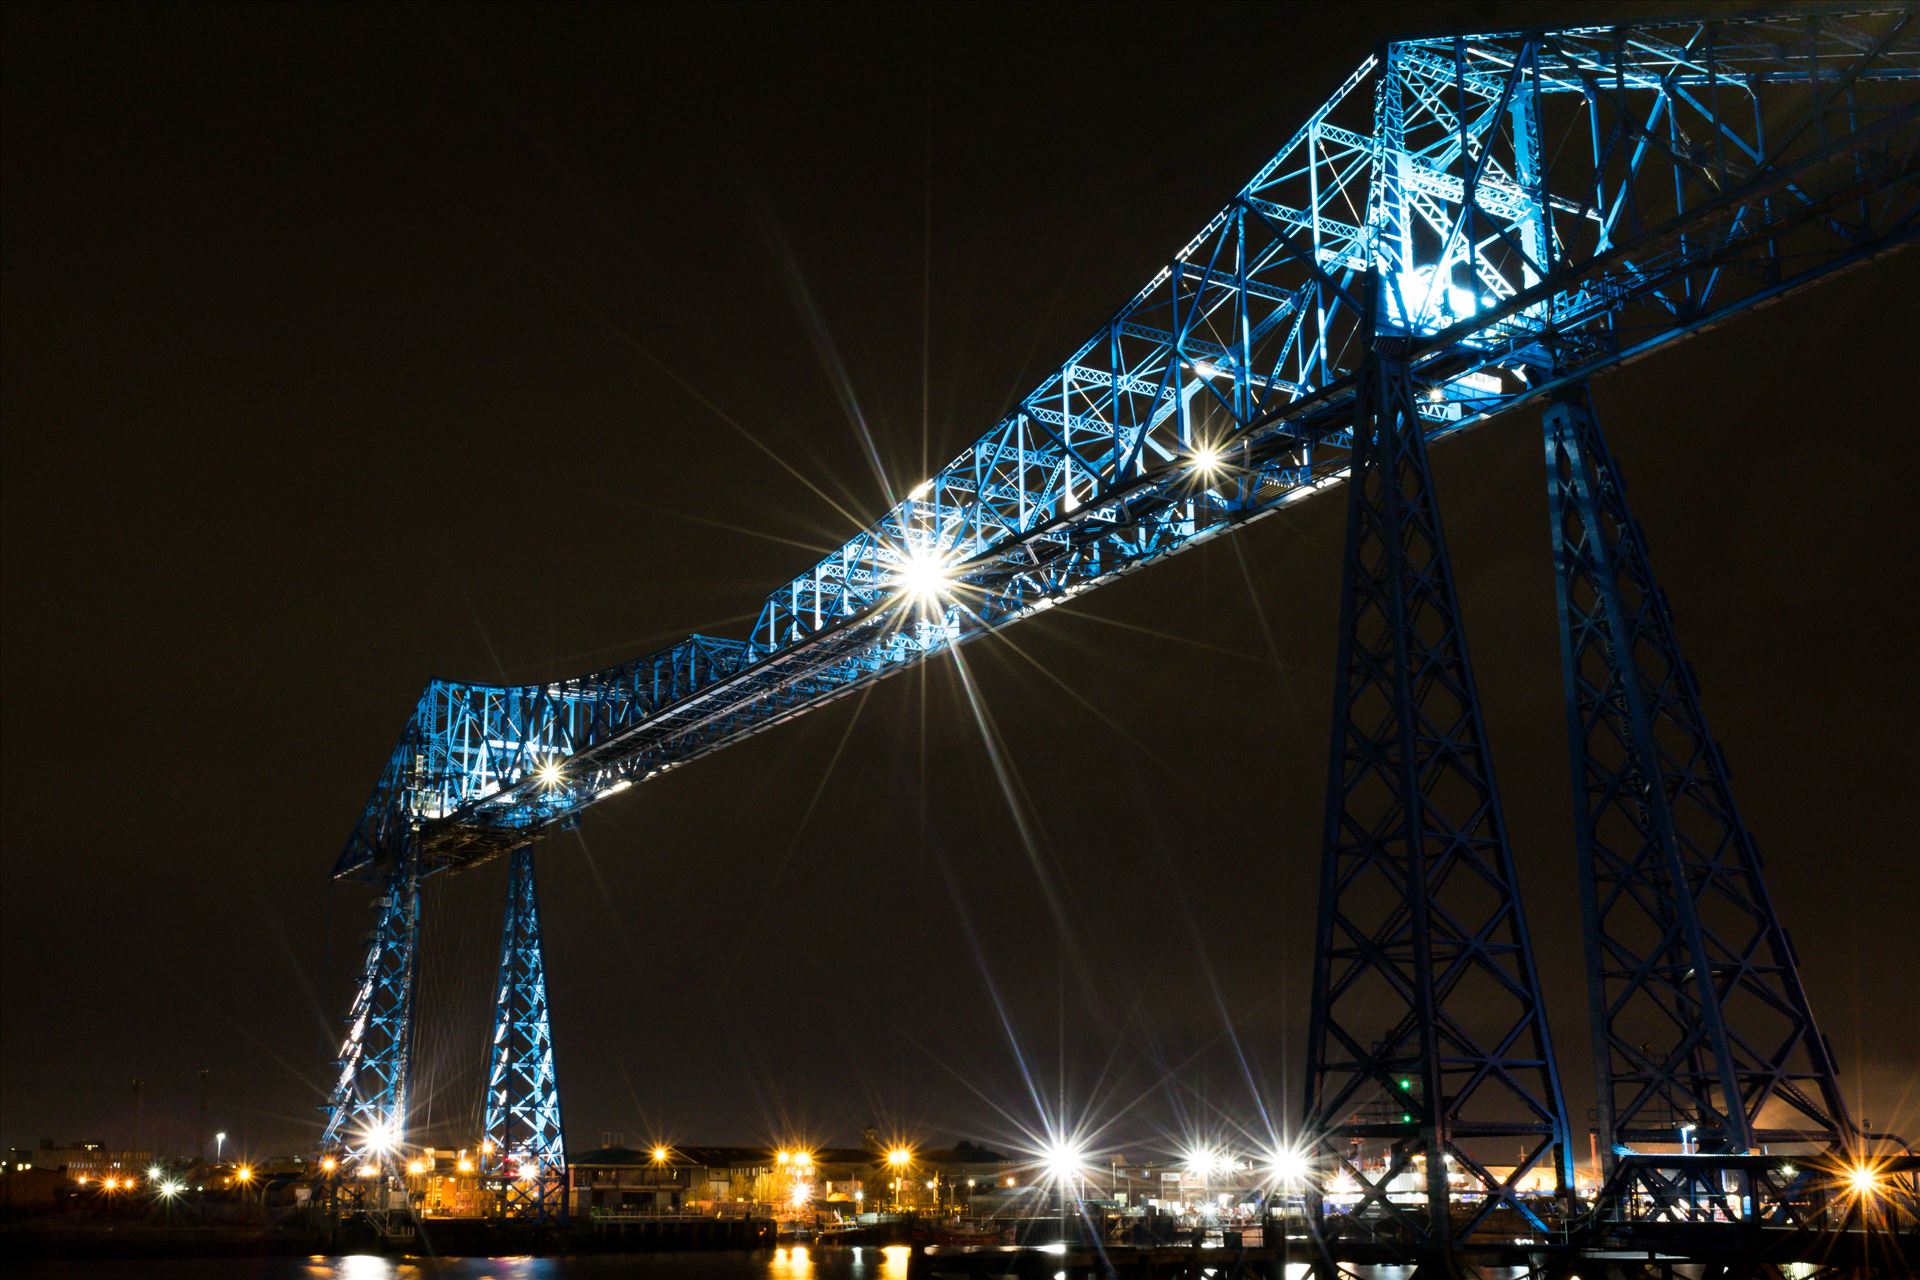 Transporter Bridge Post Clarence At Night - One of the most famous bridges in the UK The Transporter Bridge at night, To buy this image or many more of this iconic bridge, follow the link
https://www.clickasnap.com/i/432a83g7z5ewrczj by AJ Stoves Photography